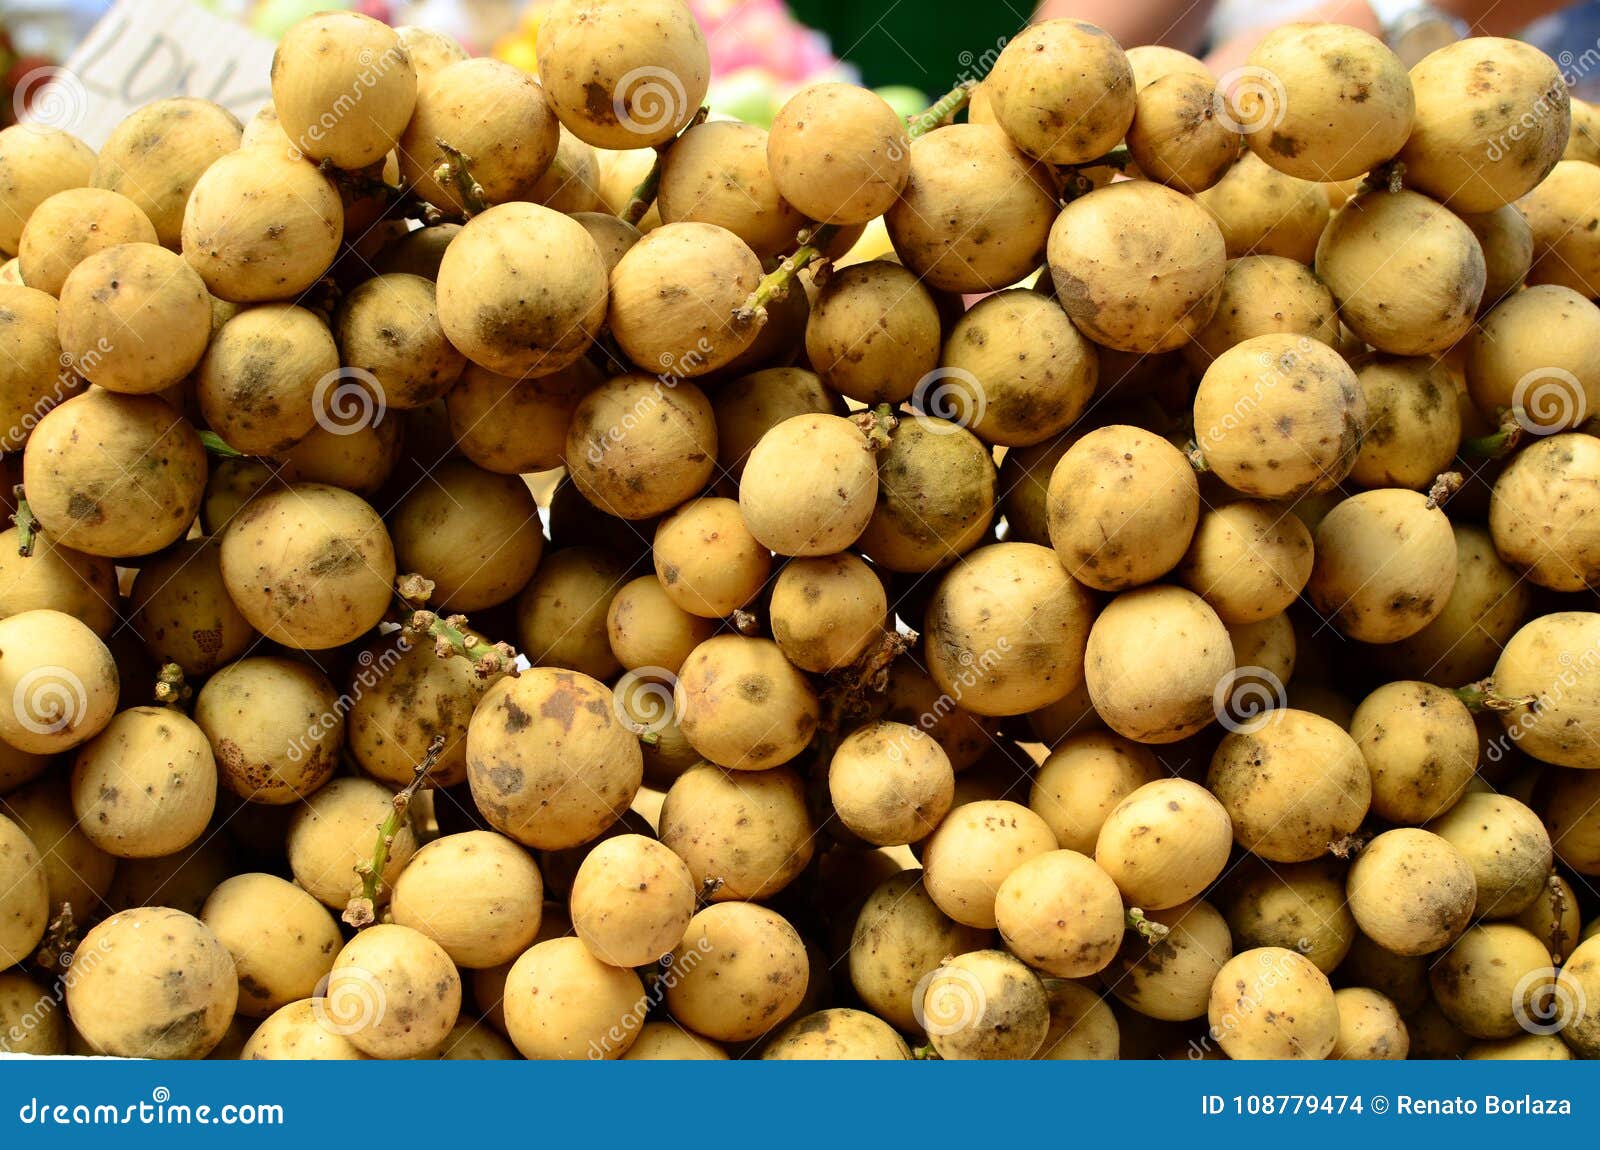 Fresh Lanzones Fruit Symmetrically To Attract Buyers At Market Stall Stock Photo Image Of Food Attract 108779474